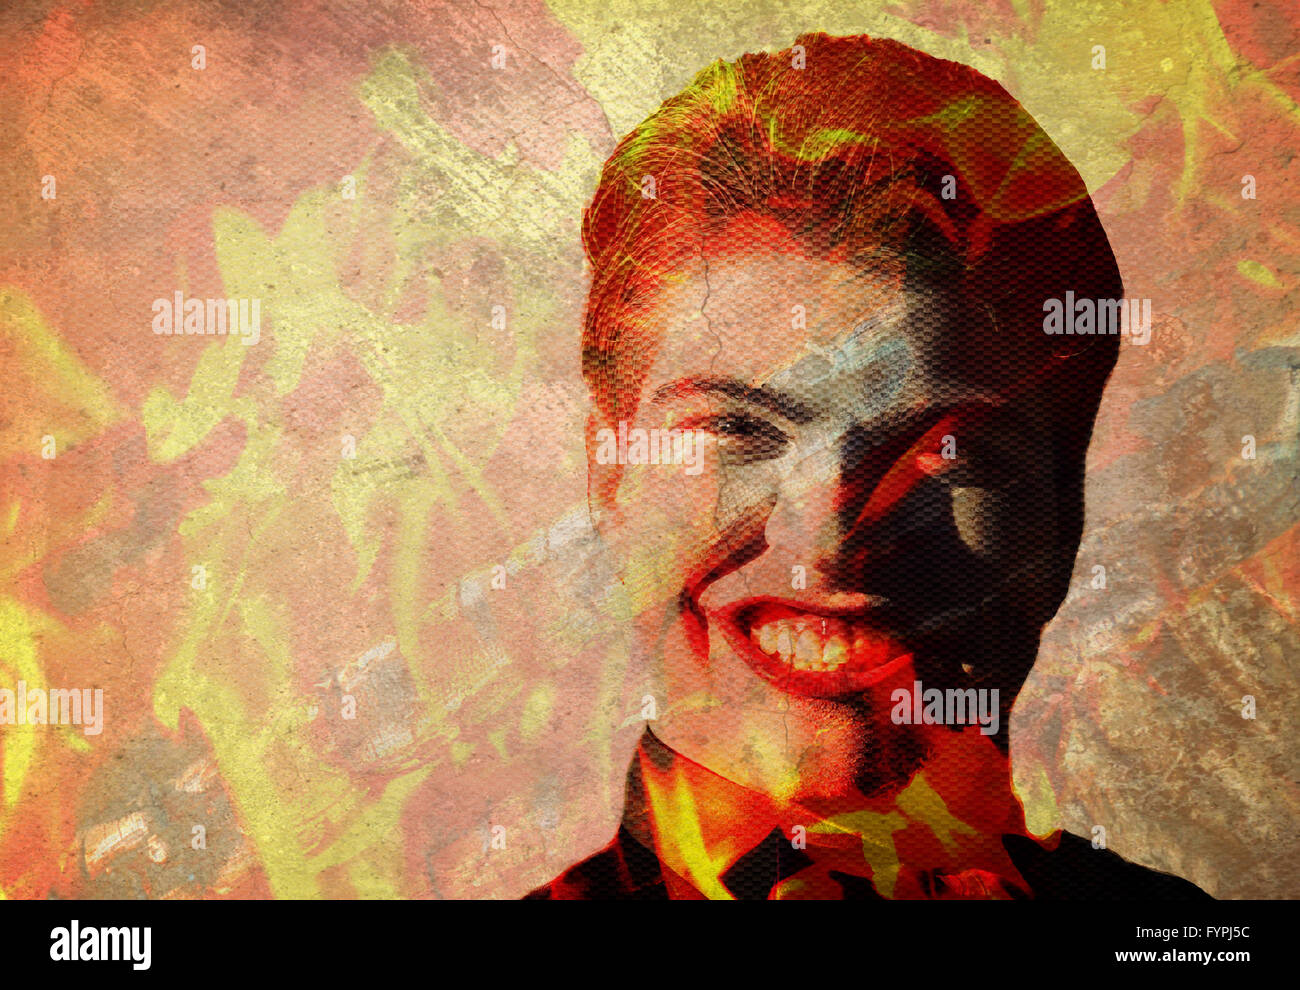 Man in flames with evil grin. Stock Photo